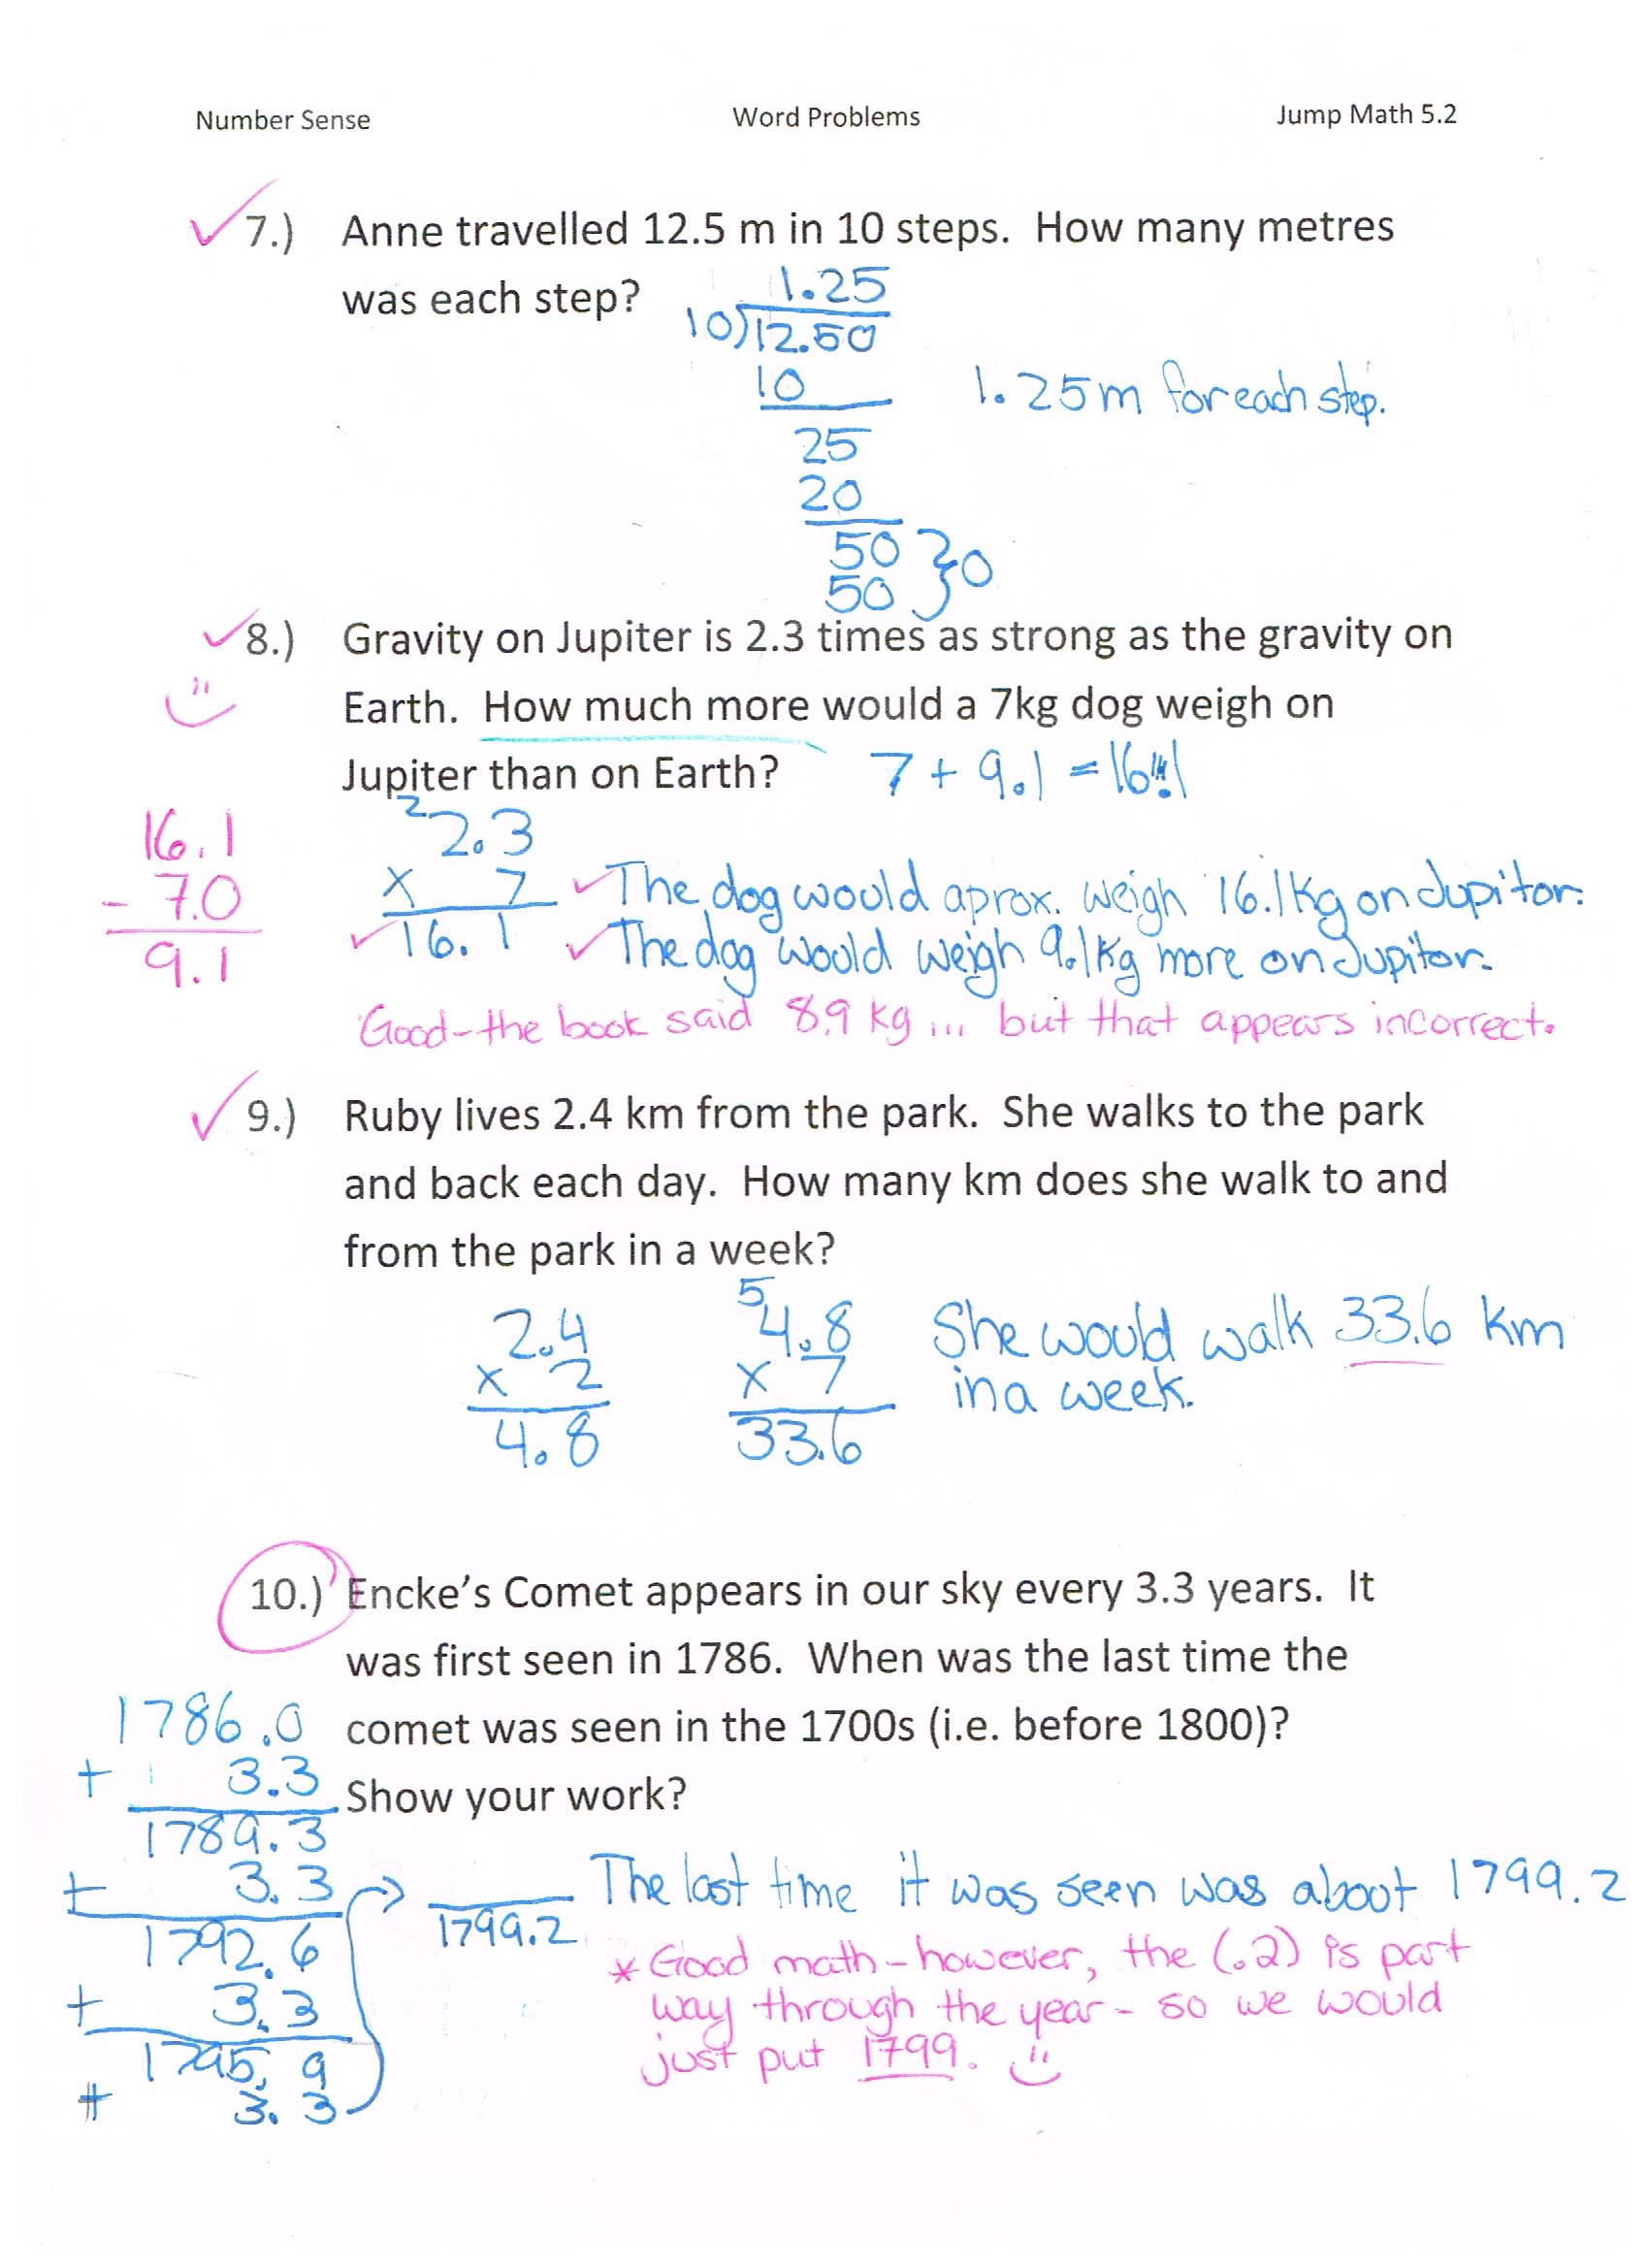 jump math 5 2 number sense word problems page 252 jessica s school work projects